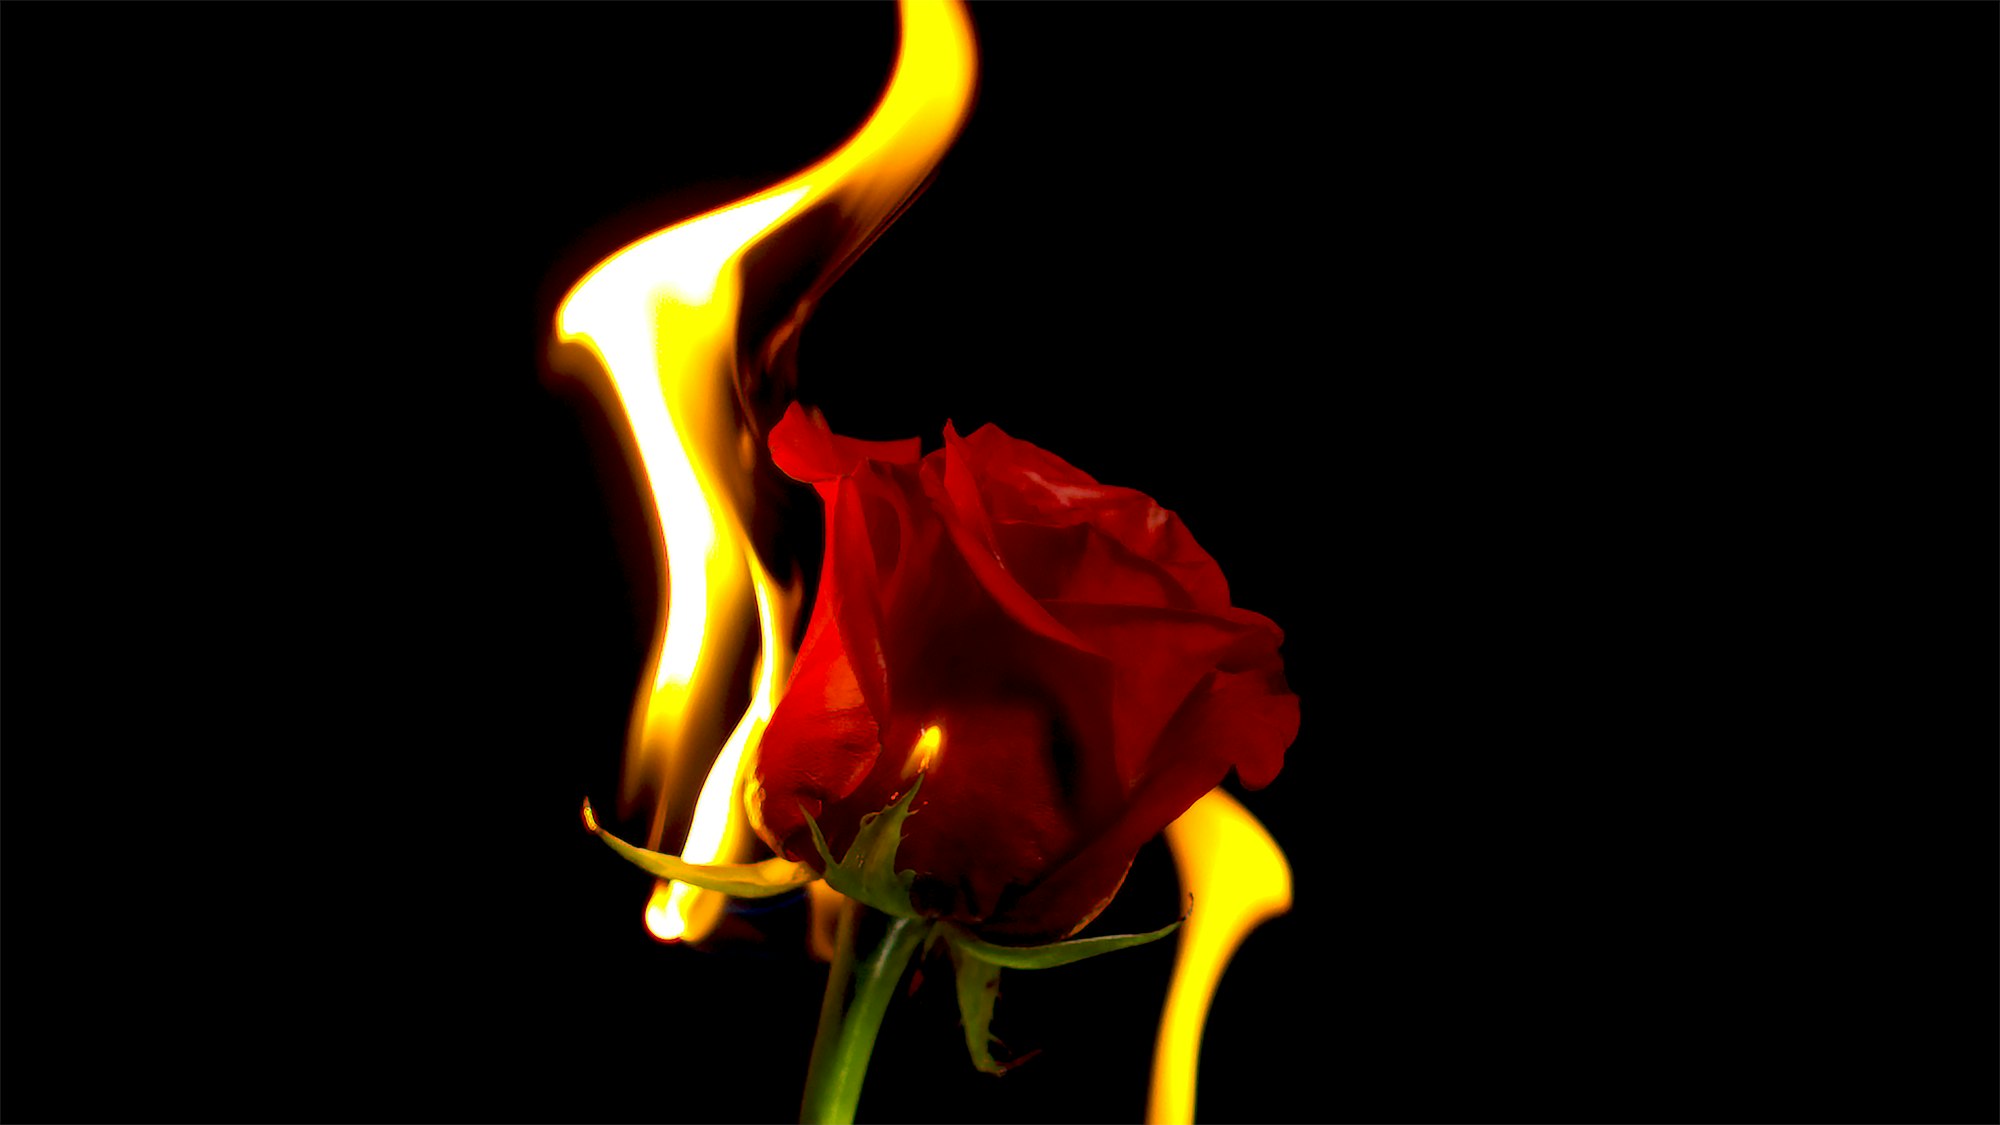 This was a frame of a rose burning was captured from a test shot from my new camera. 

Follow me on Insta @zvessels55